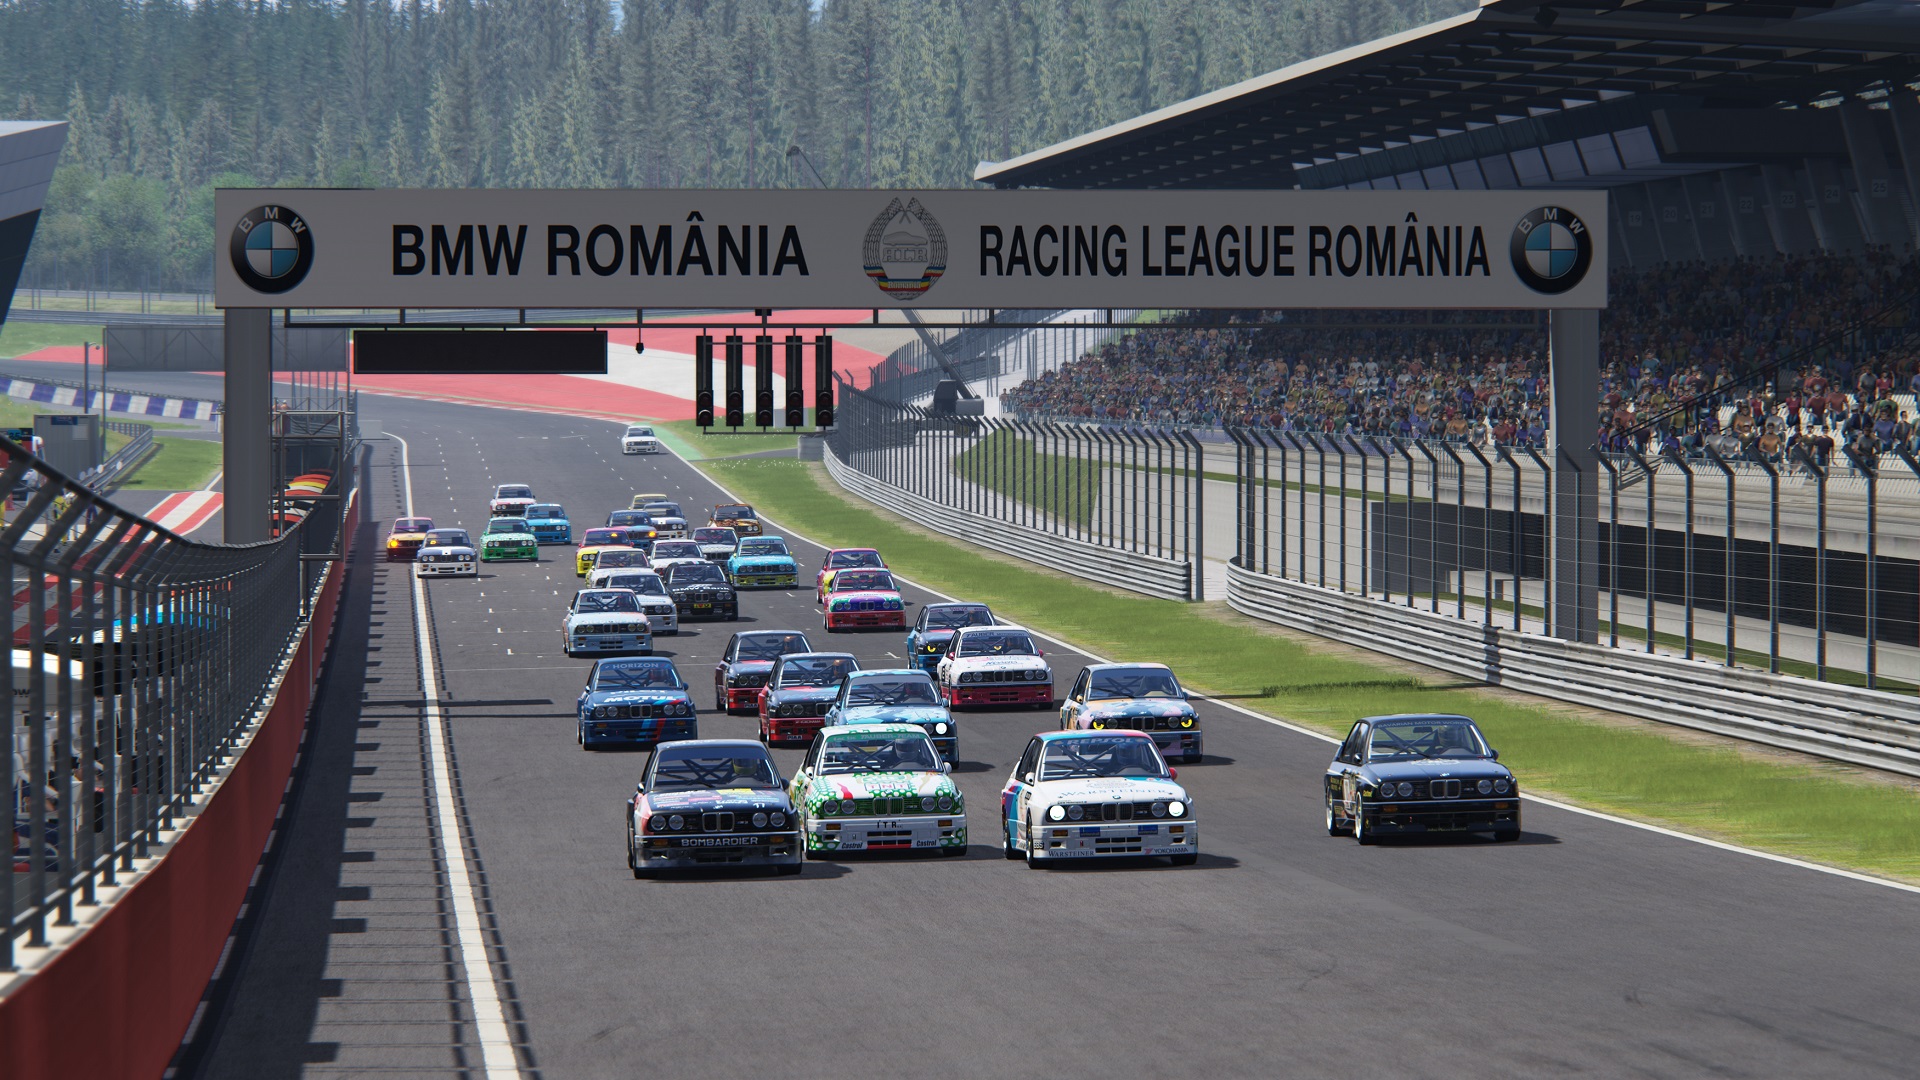 League racing: The best way to get faster in the sim?